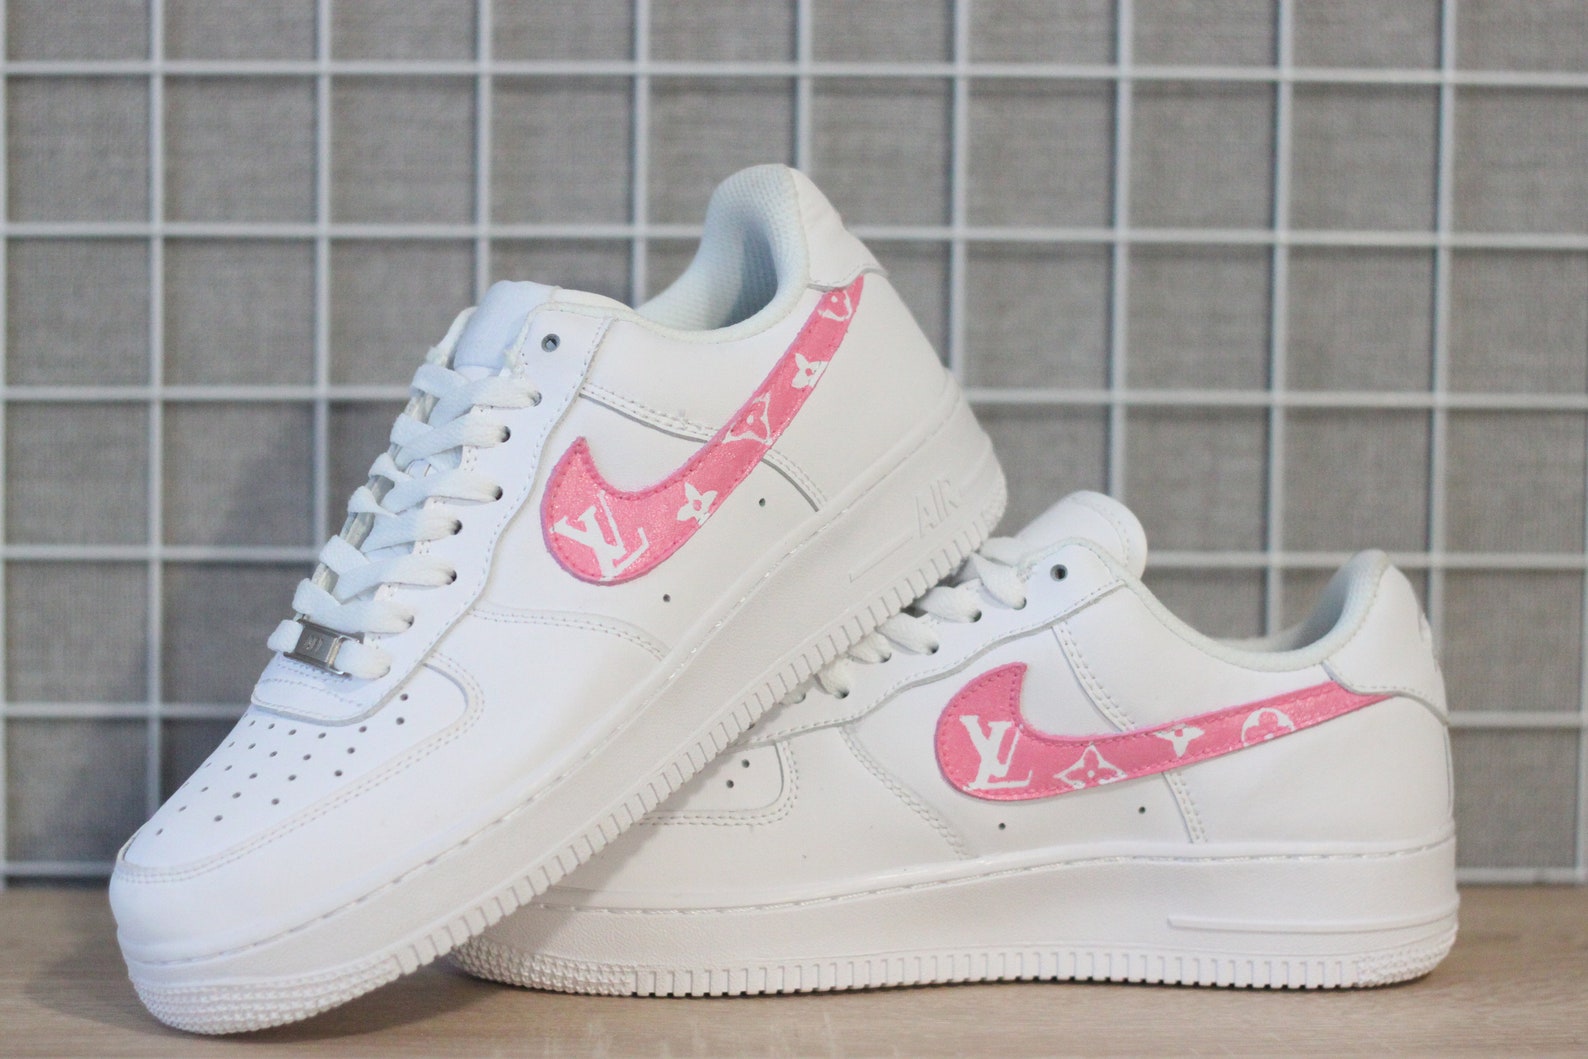 Louis vuitton air force 1 / Nike air force 1 / Painted | Etsy